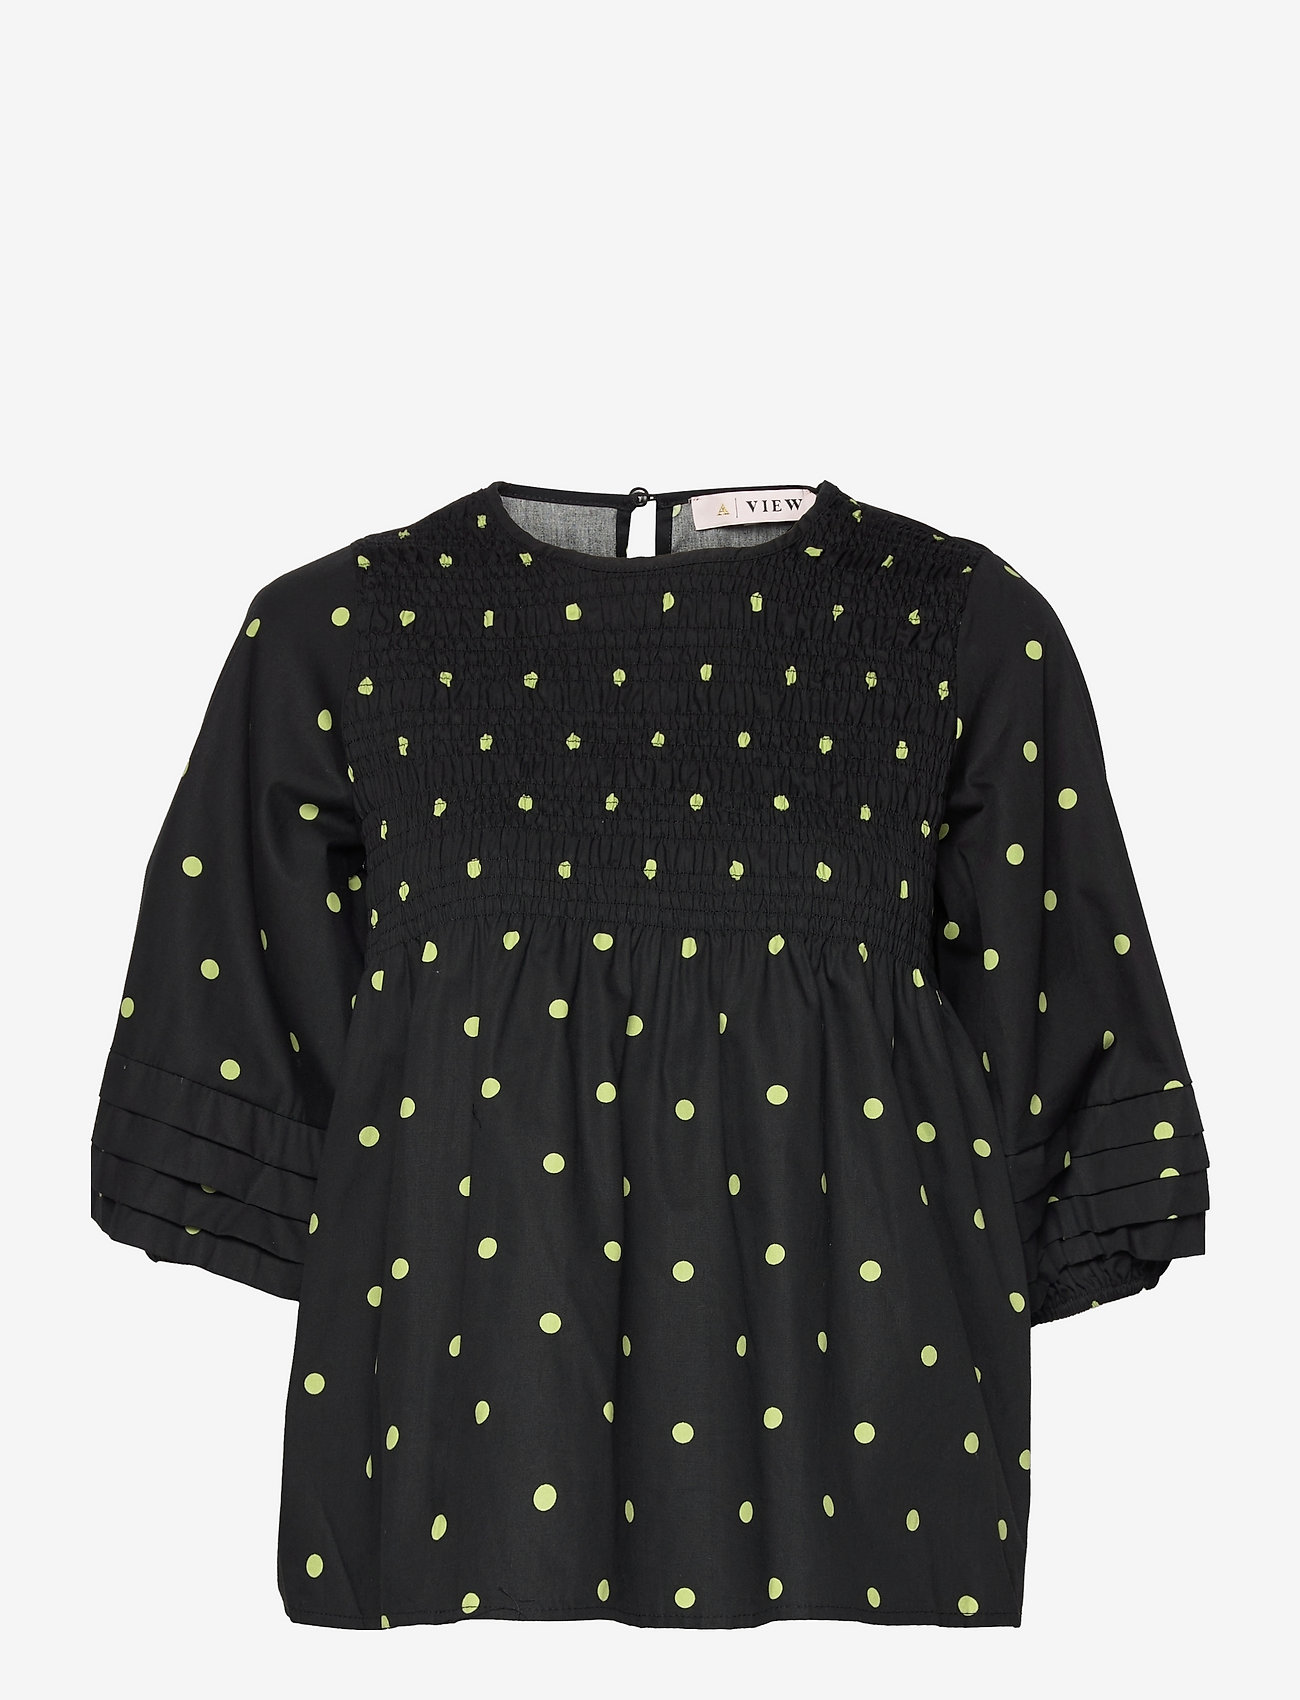 A-View - Sisse blouse - lyhythihaiset puserot - black with green dots - 0